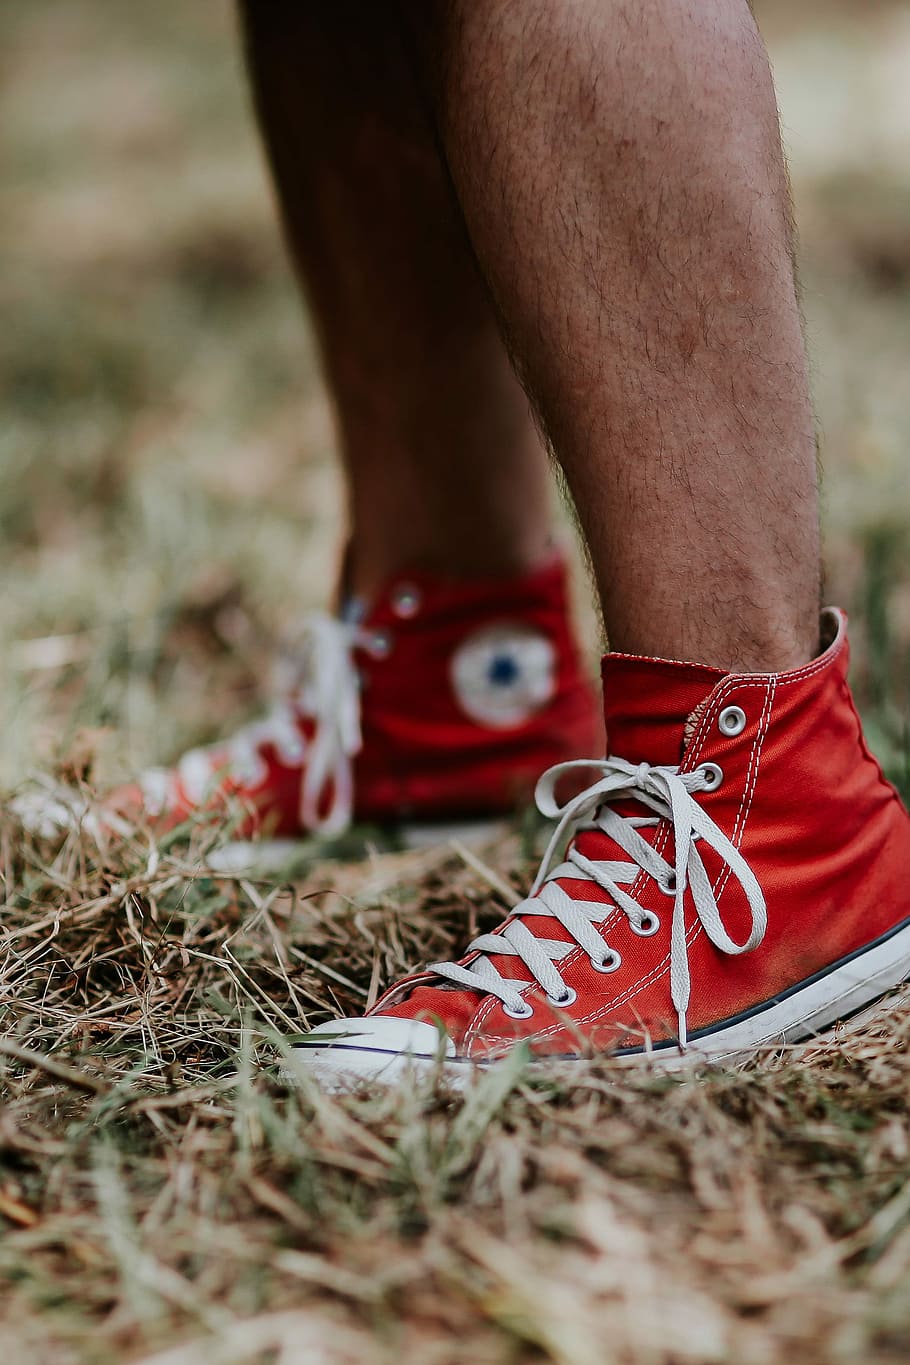 HD wallpaper: Man in a red sneaker shoes, sneakers, trainers, converse,  outdoors | Wallpaper Flare